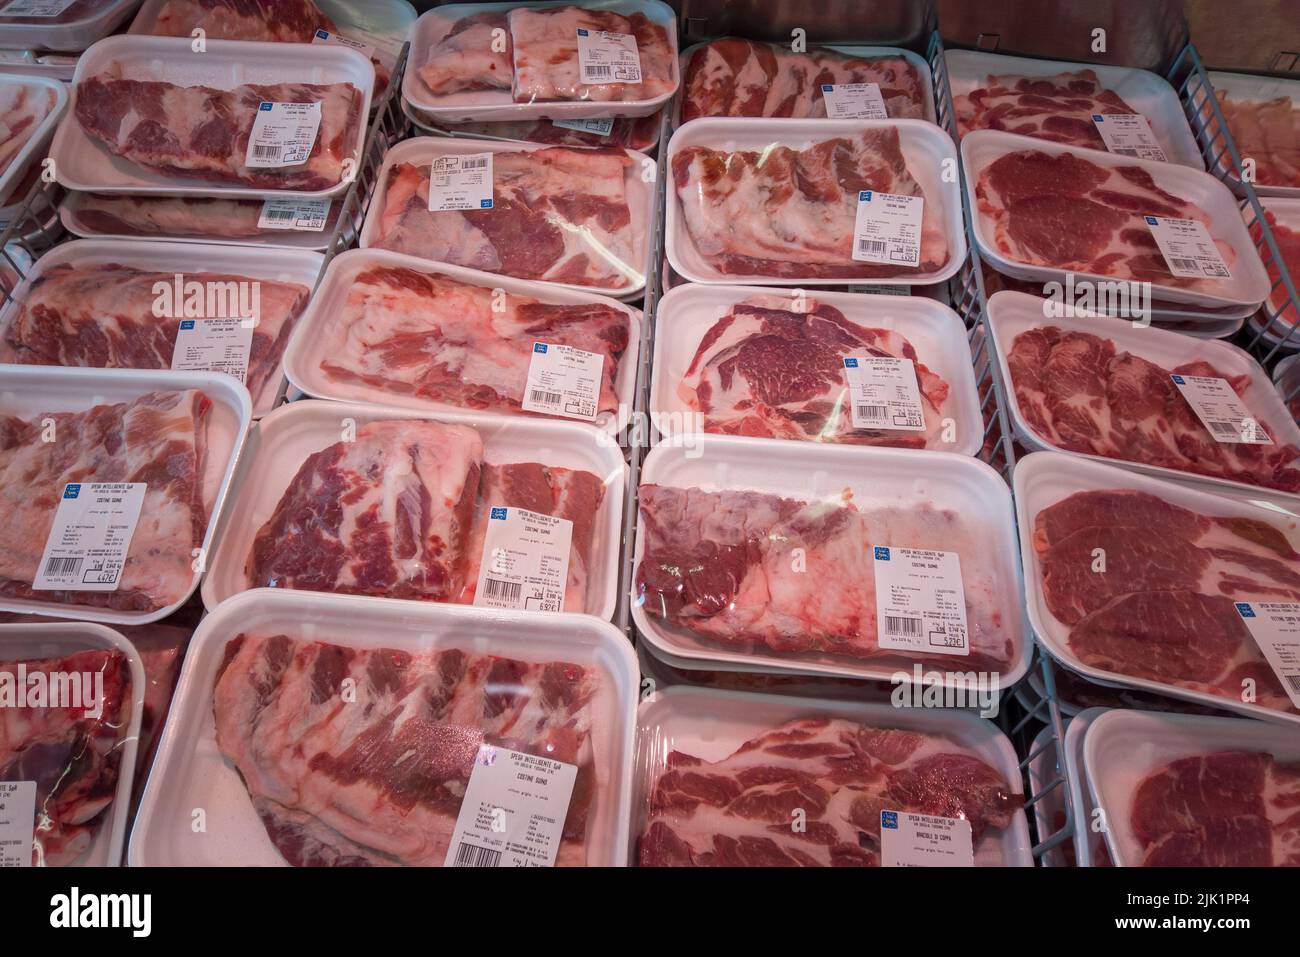 Fossano, Italy - July 29, 2022: Raw pork ribs ready to barbecue in plastic food trays in the refrigerated counter of the Italian supermarket Eurospin. Stock Photo